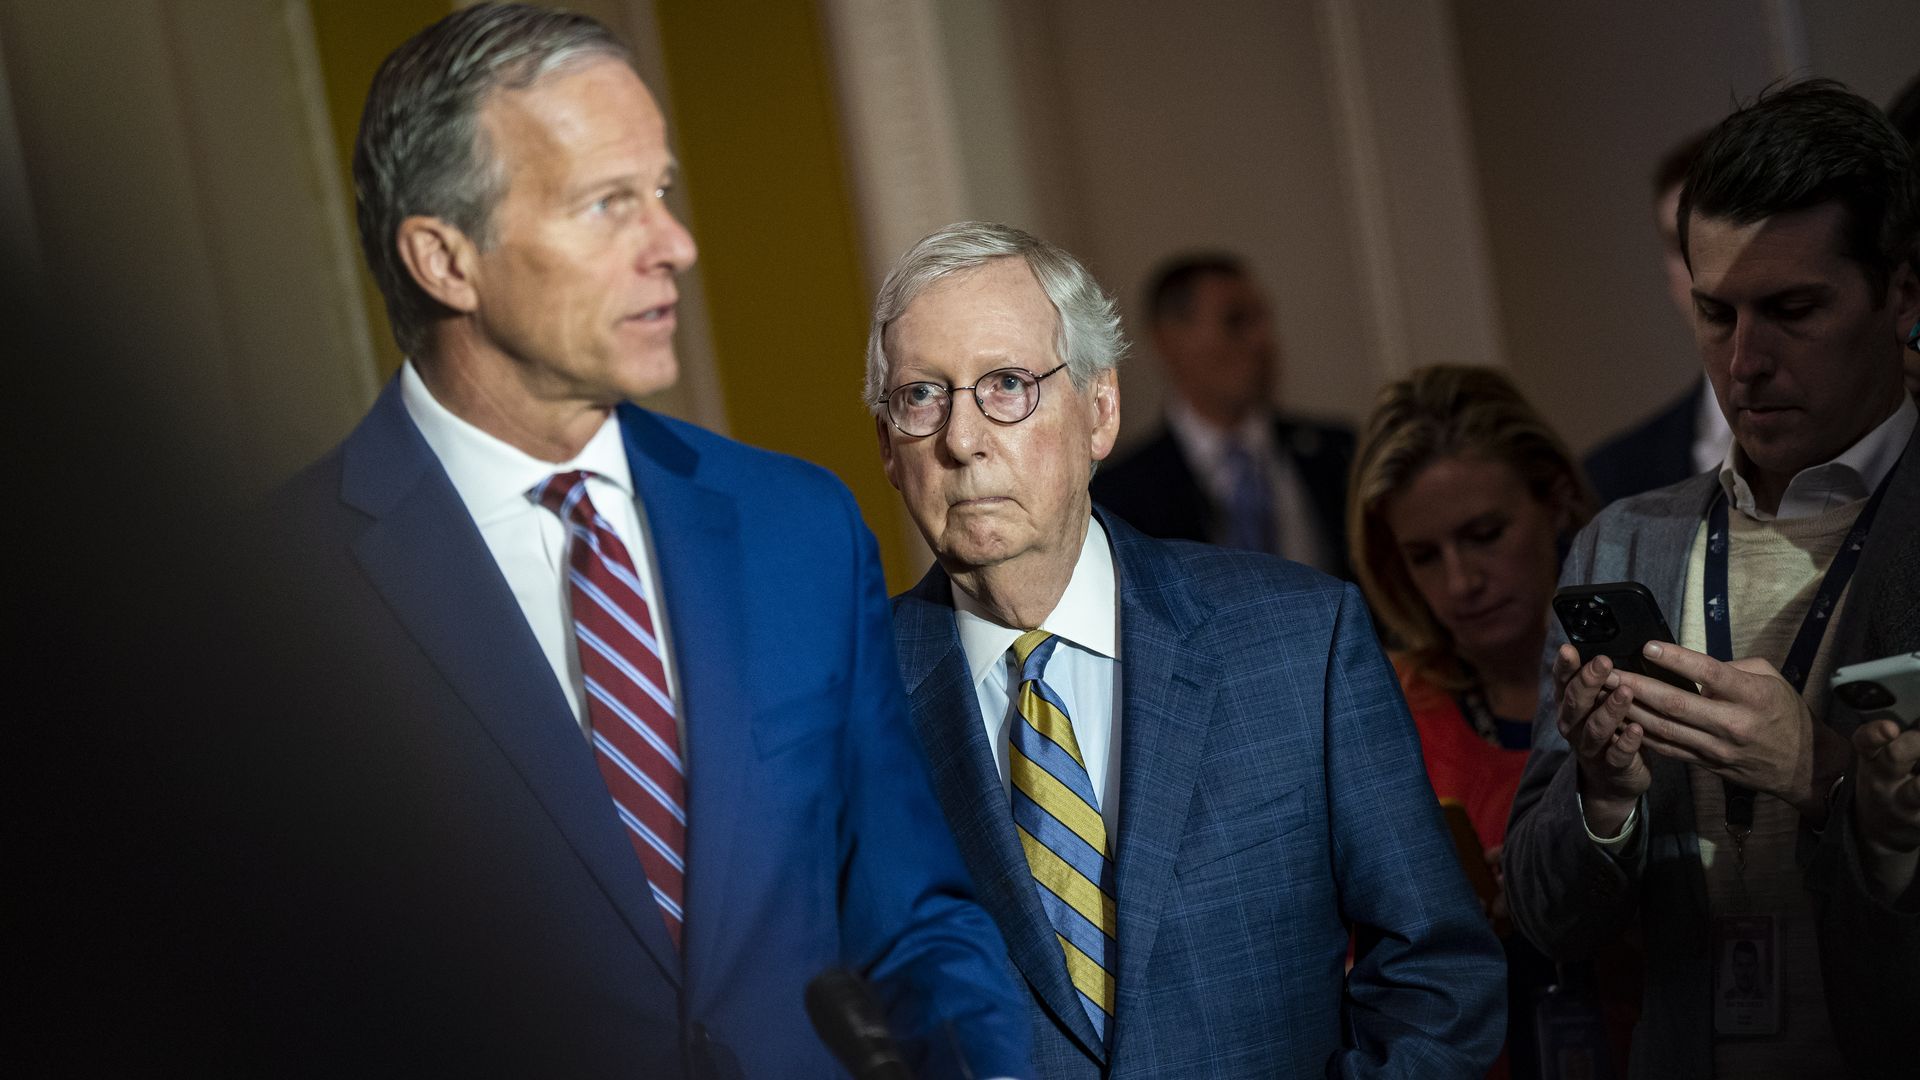 John Thune and Mitch McConnell